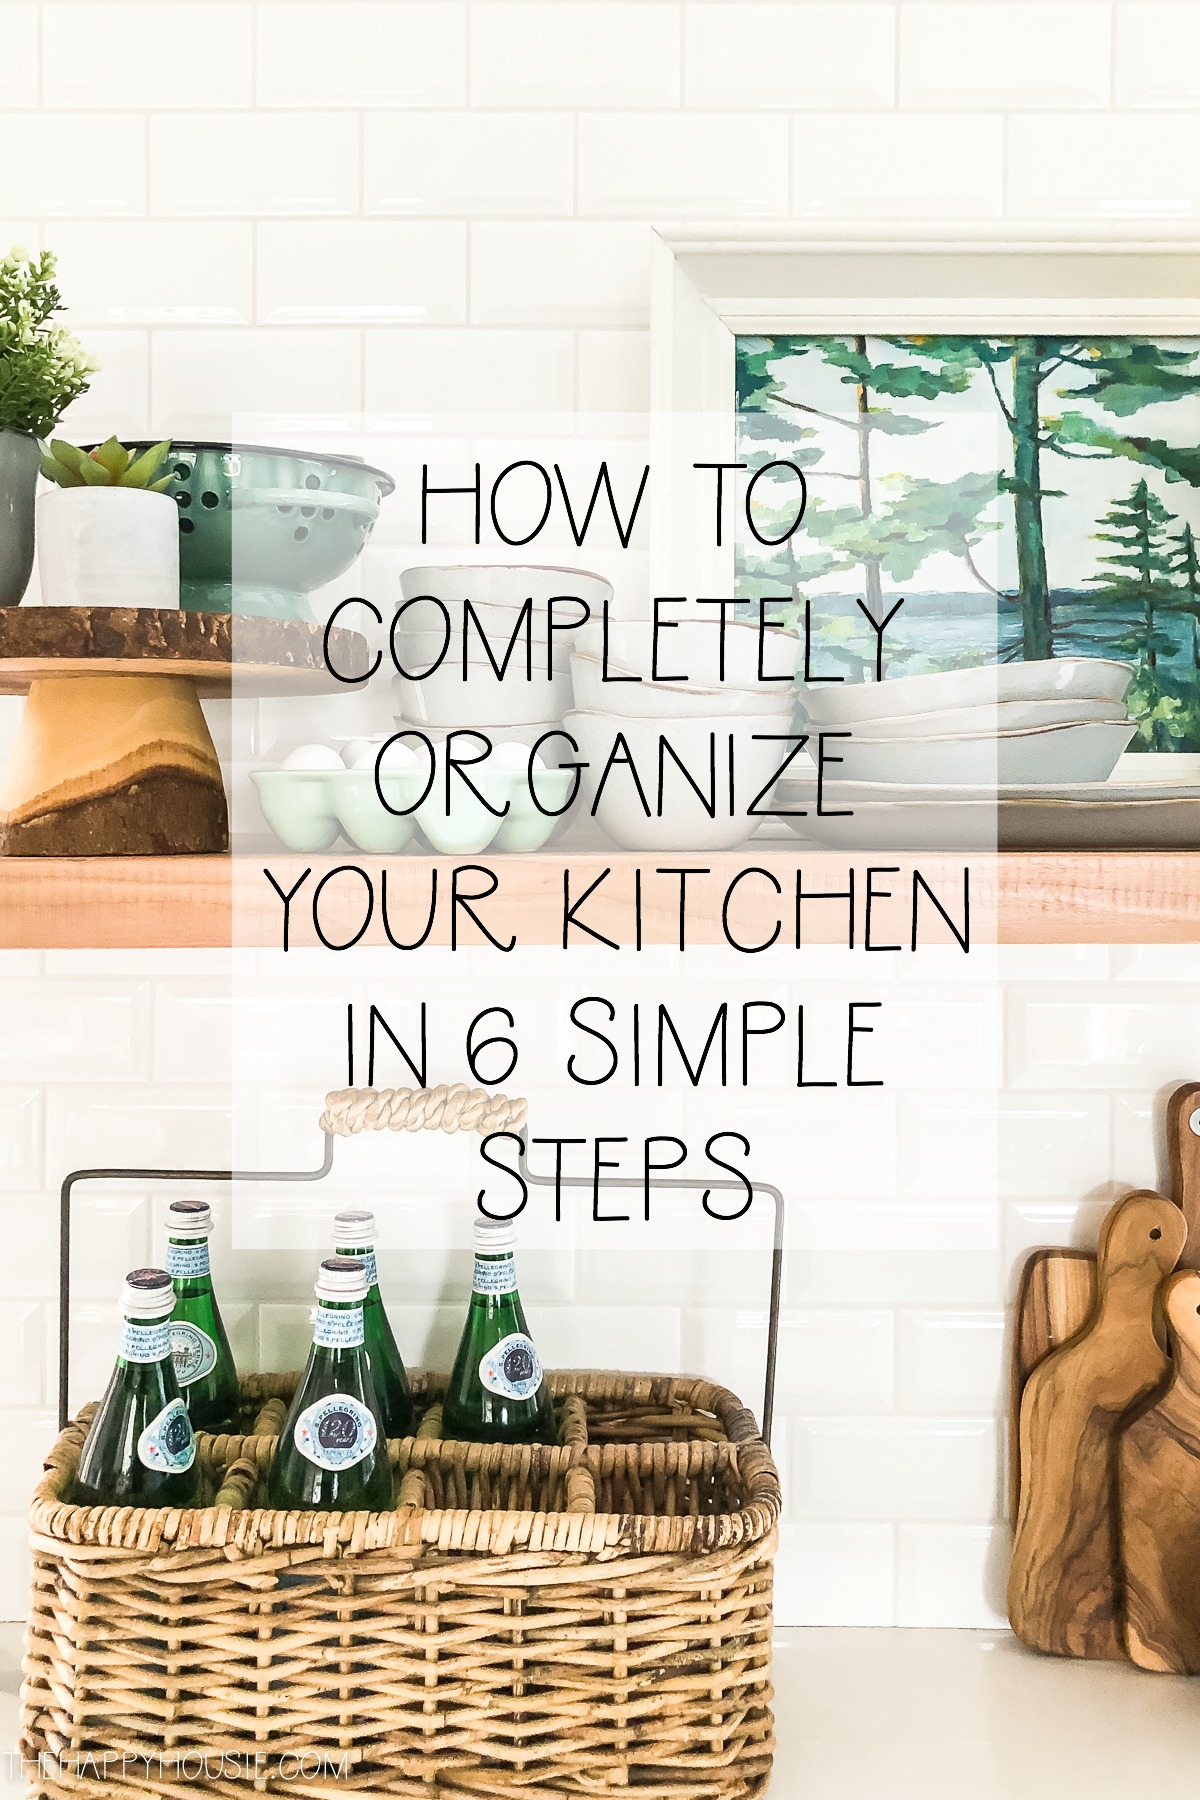 https://www.thehappyhousie.com/wp-content/uploads/2020/01/how-to-completely-organize-your-kitchen-and-pantry-in-6-simple-steps-at-the-happy-housie.jpg